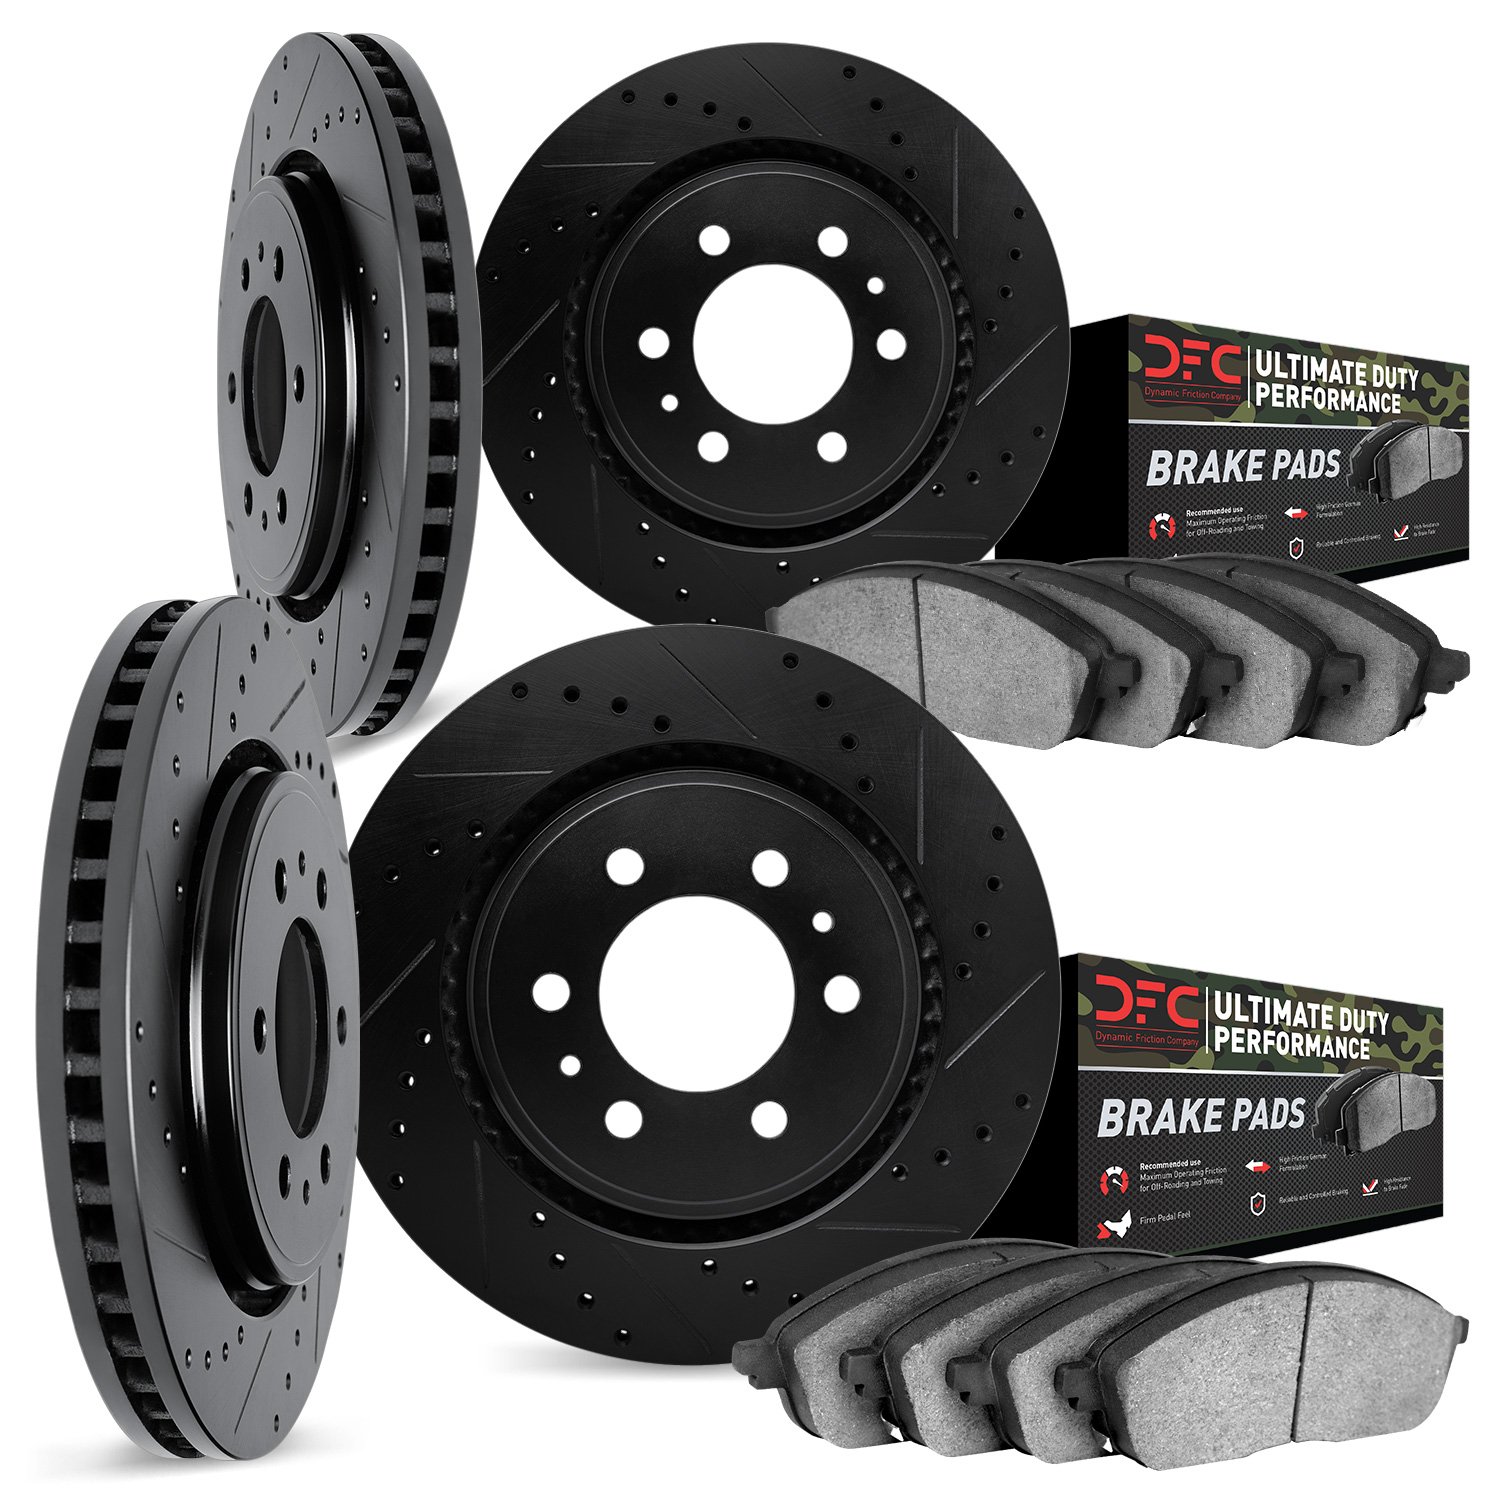 8404-40005 Drilled/Slotted Brake Rotors with Ultimate-Duty Brake Pads Kit [Black], 2003-2003 Mopar, Position: Front and Rear